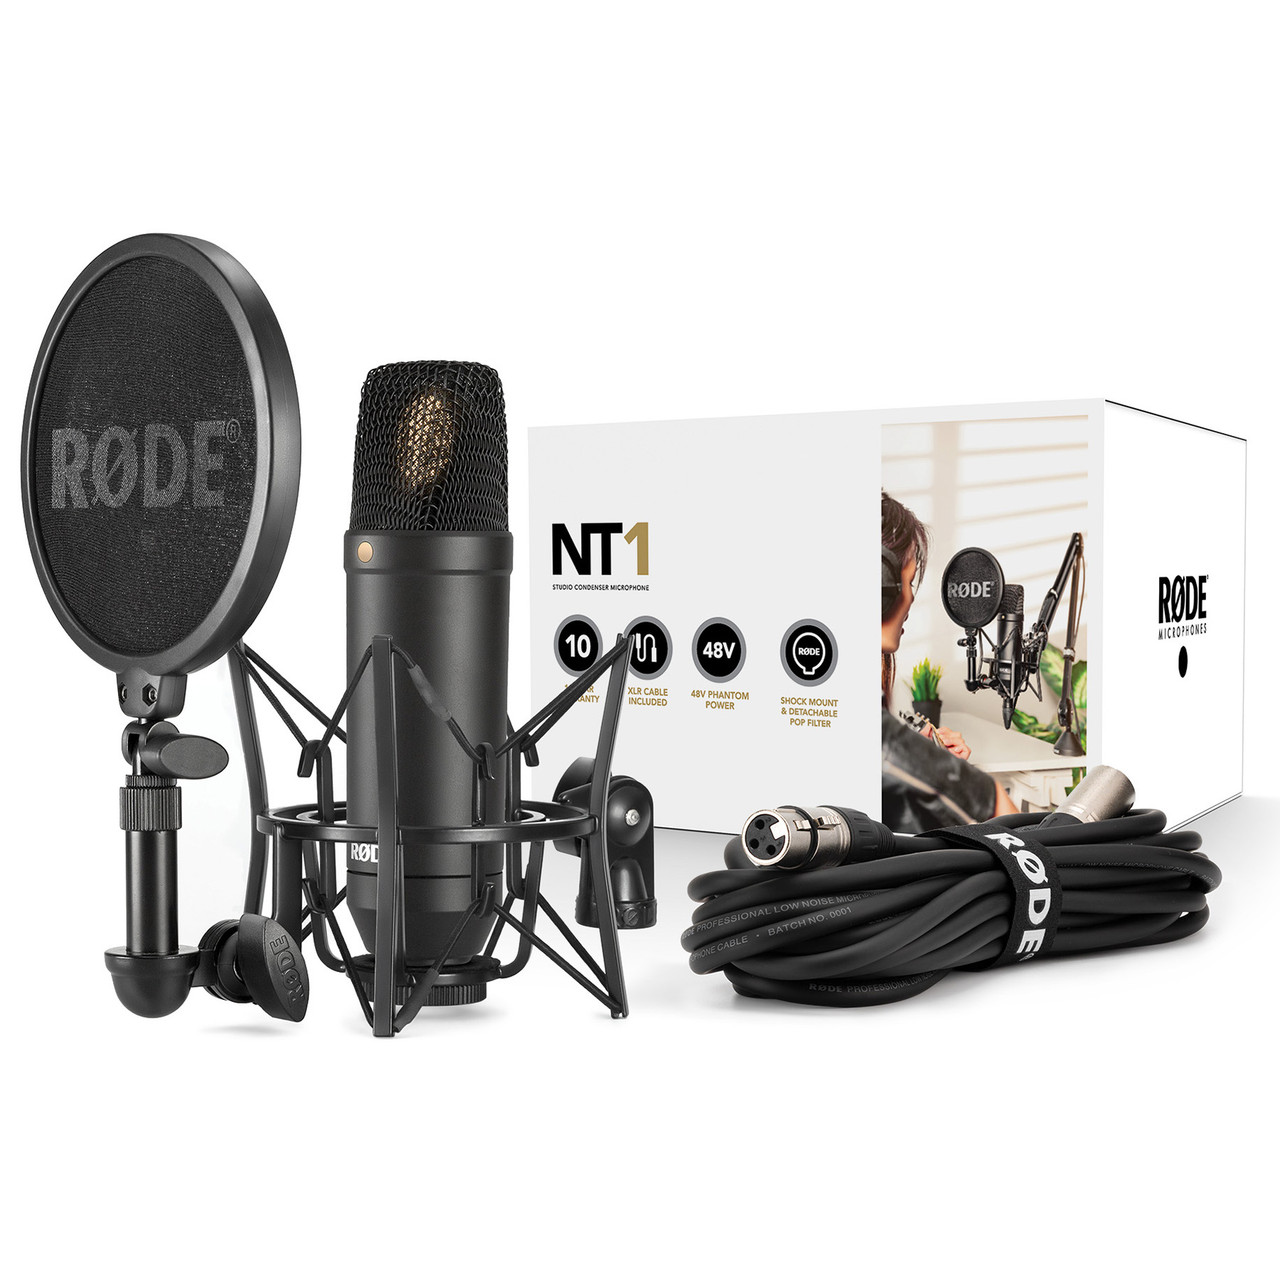 Rode NT1 Microphone Kit